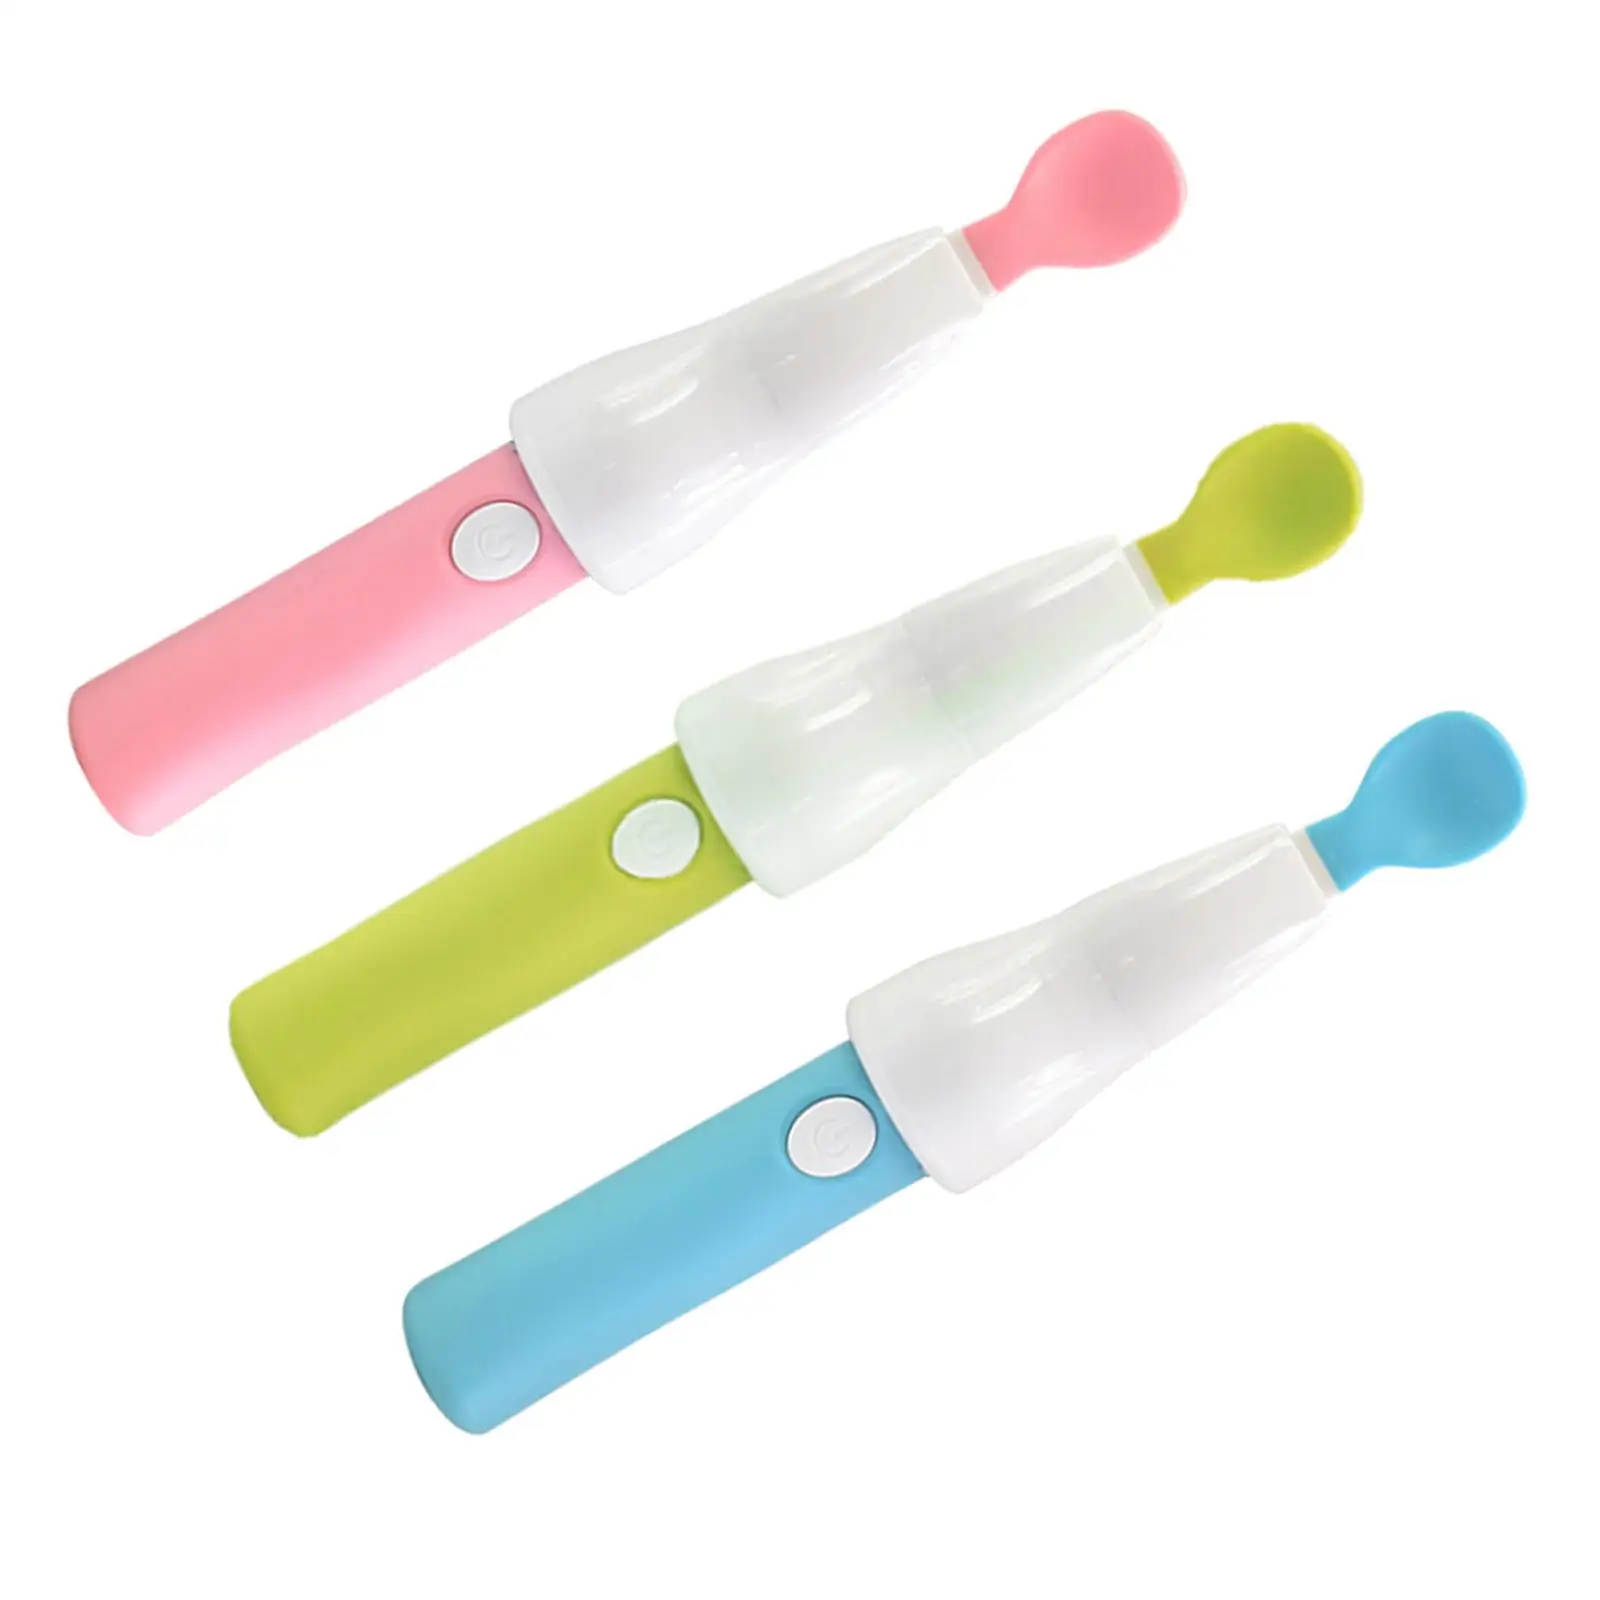 Automatic Cooler Baby Feeder Spoon One Handed Feeding Convenient Soft Infant Food Dispensing Spoon for Infant Newborn Toddler